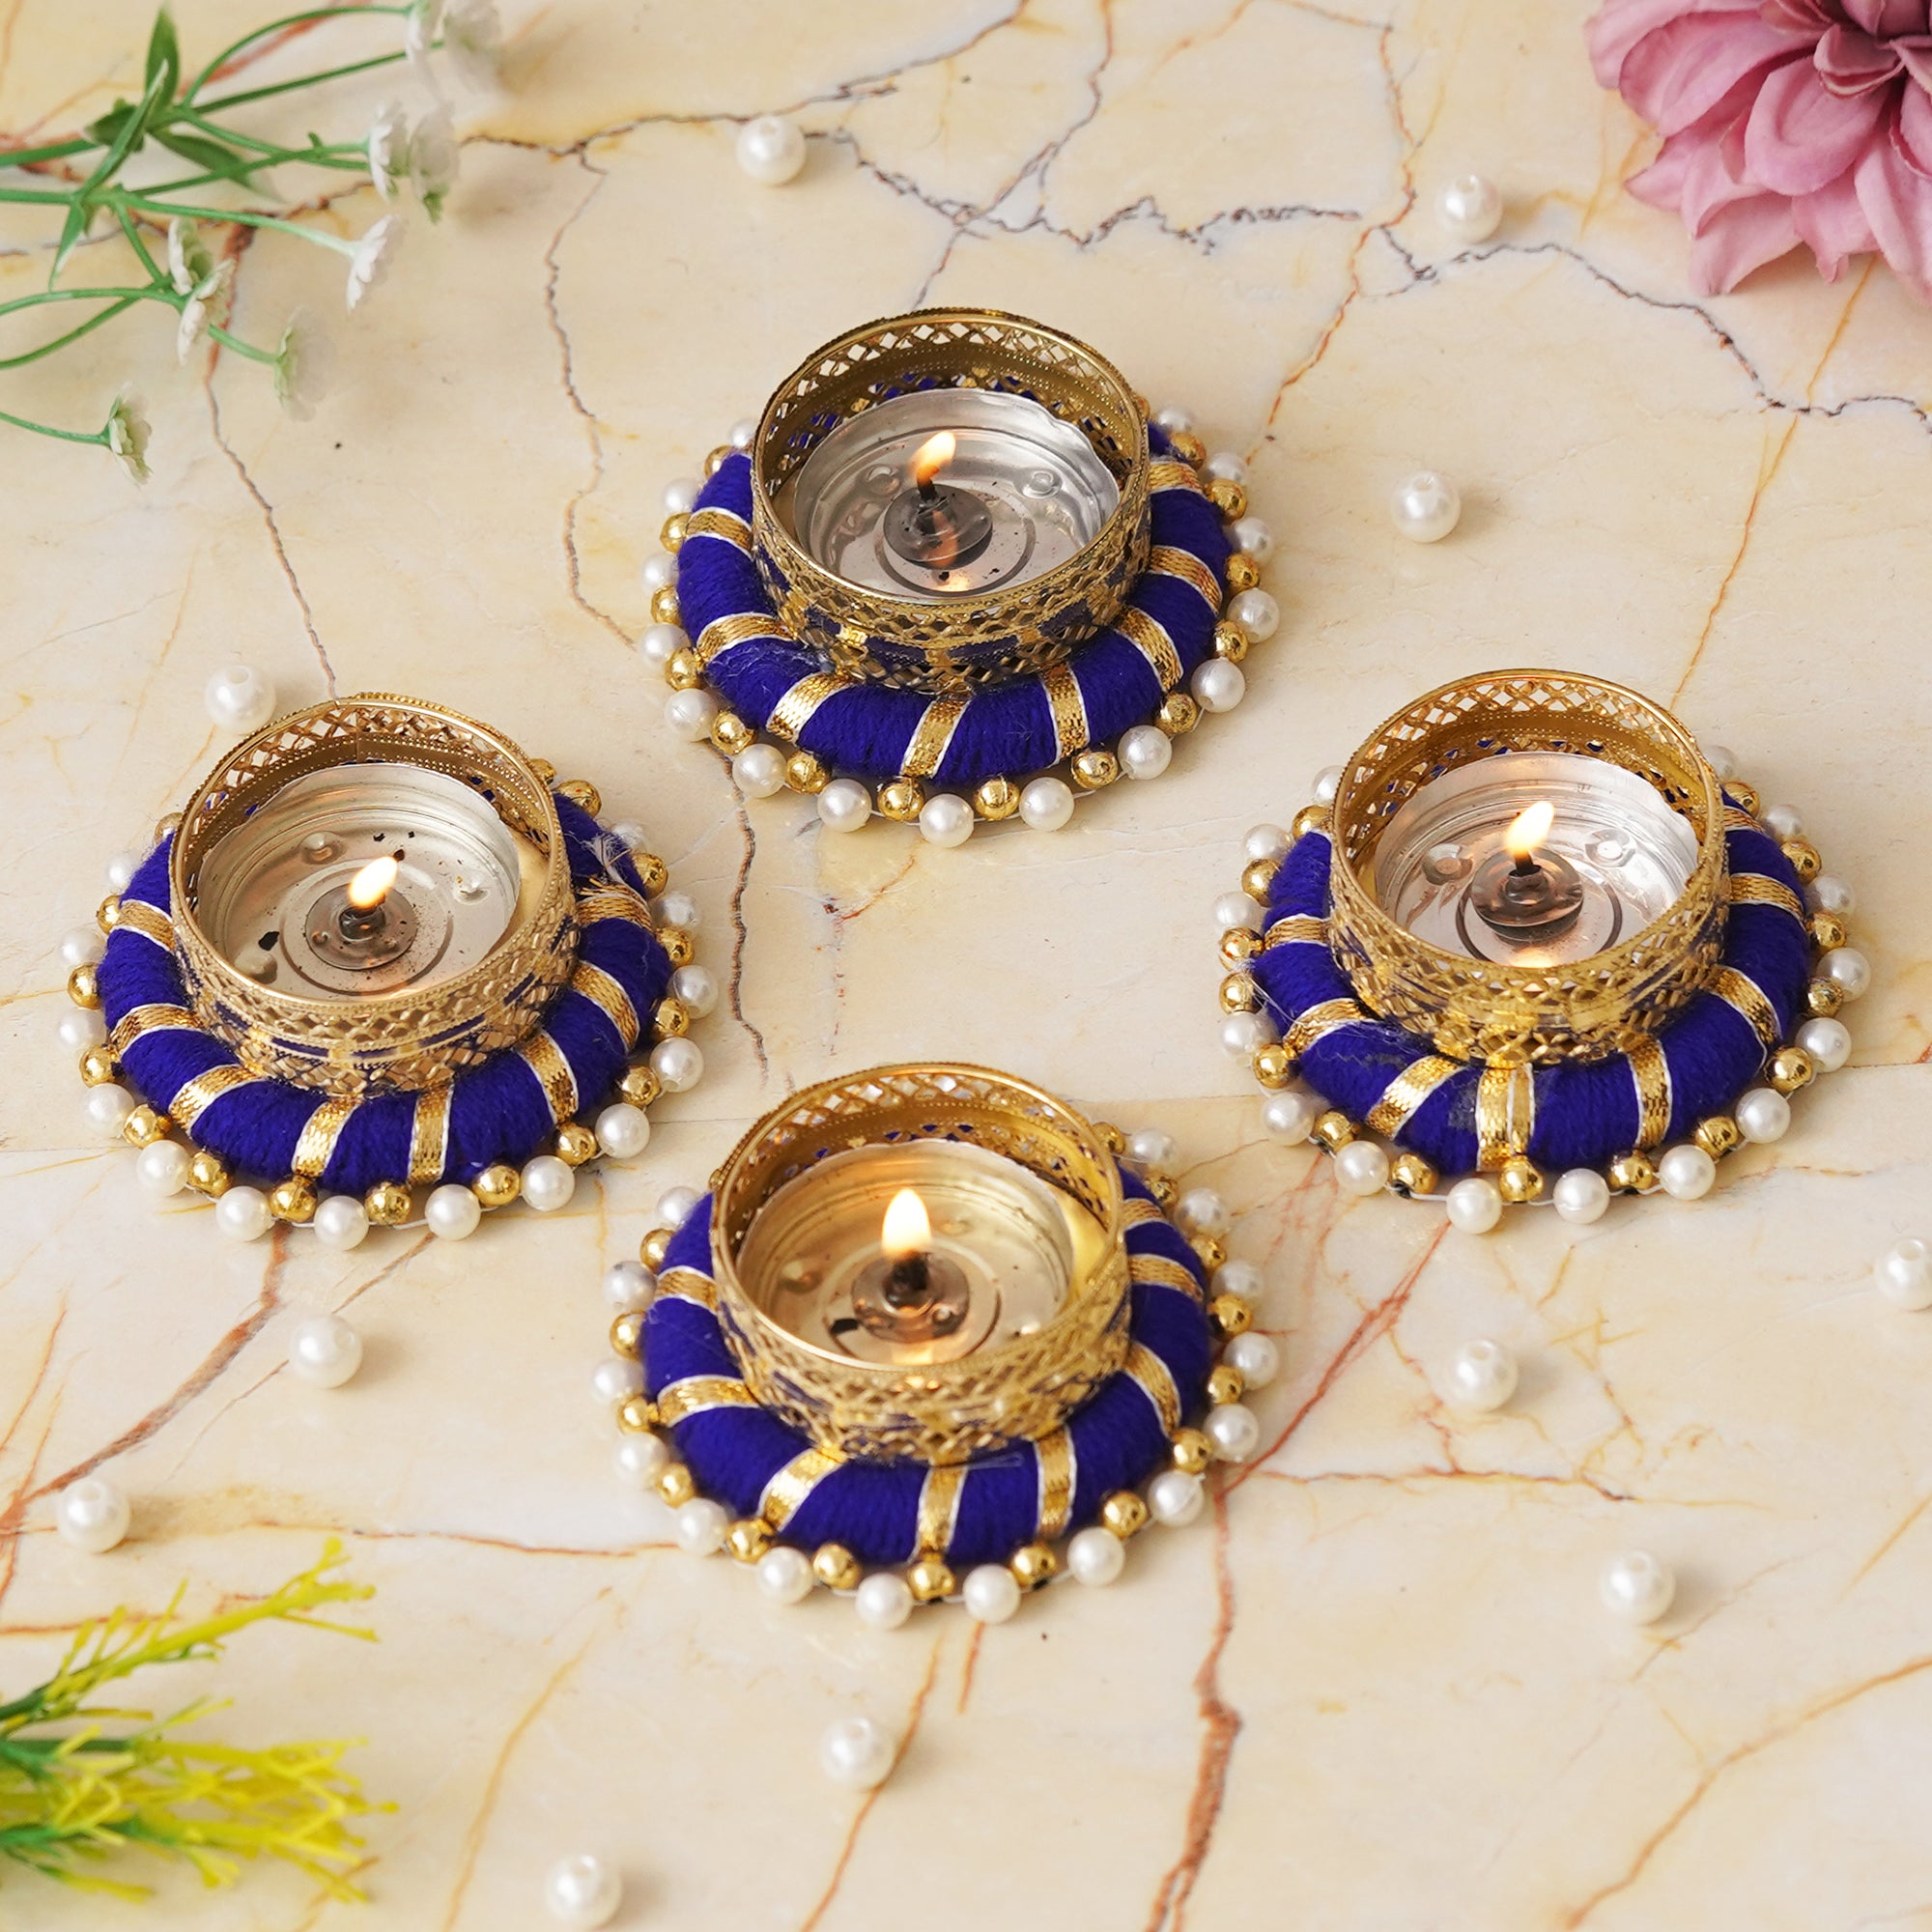 eCraftIndia Set of 4 Golden and Blue Round Shaped Beaded Decorative Tea Light Candle Holders